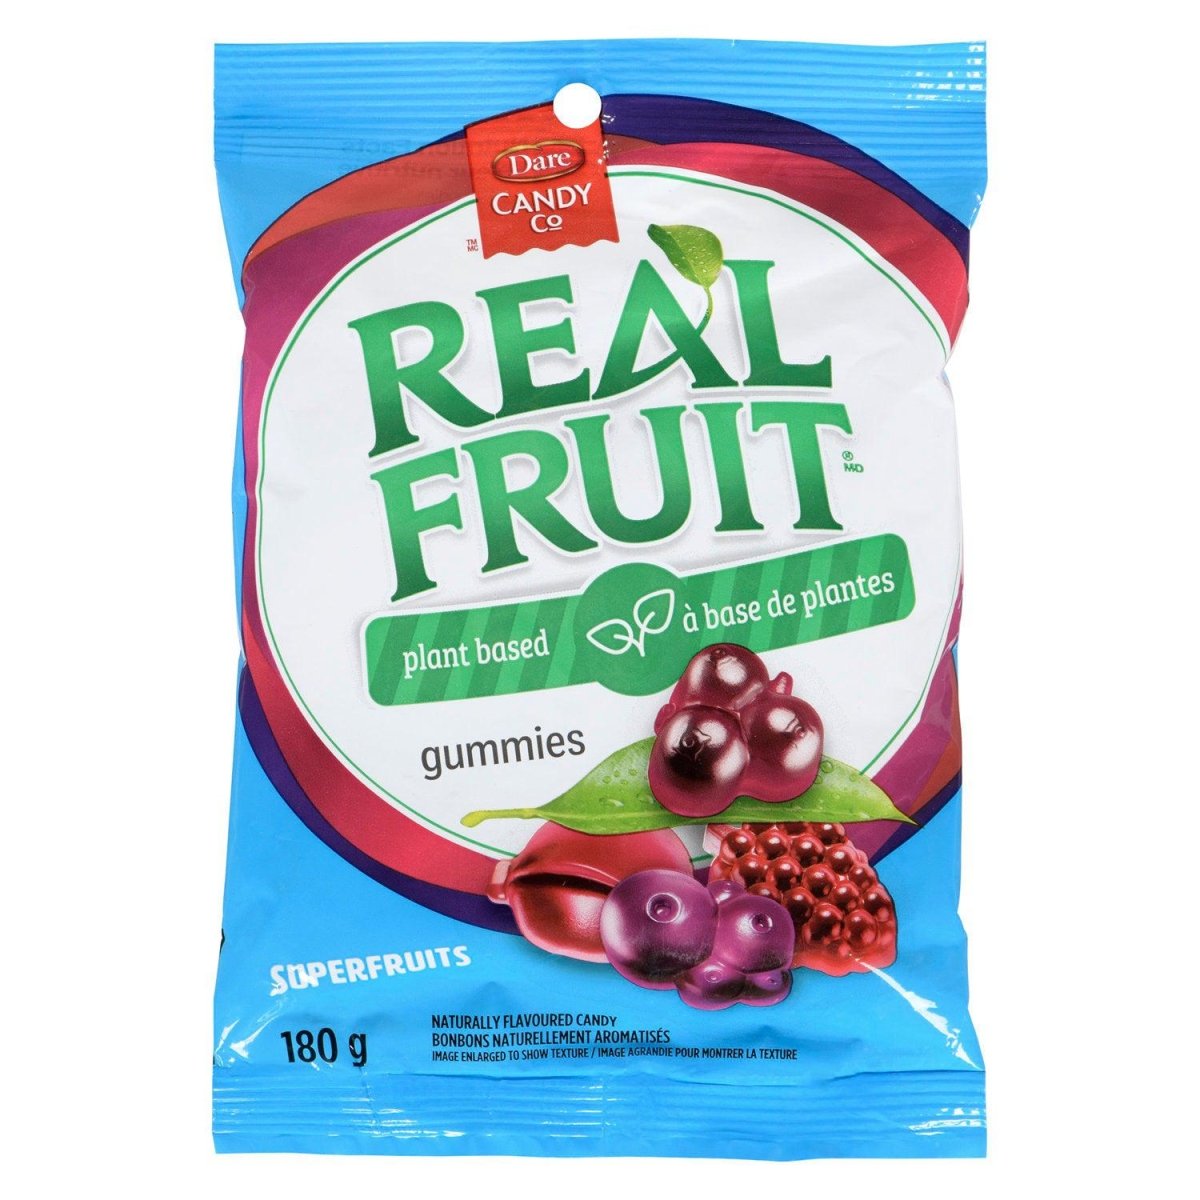 Dare Candy Co Real Fruit Gummies Superfruits (Canada) 180g - Candy Mail UK